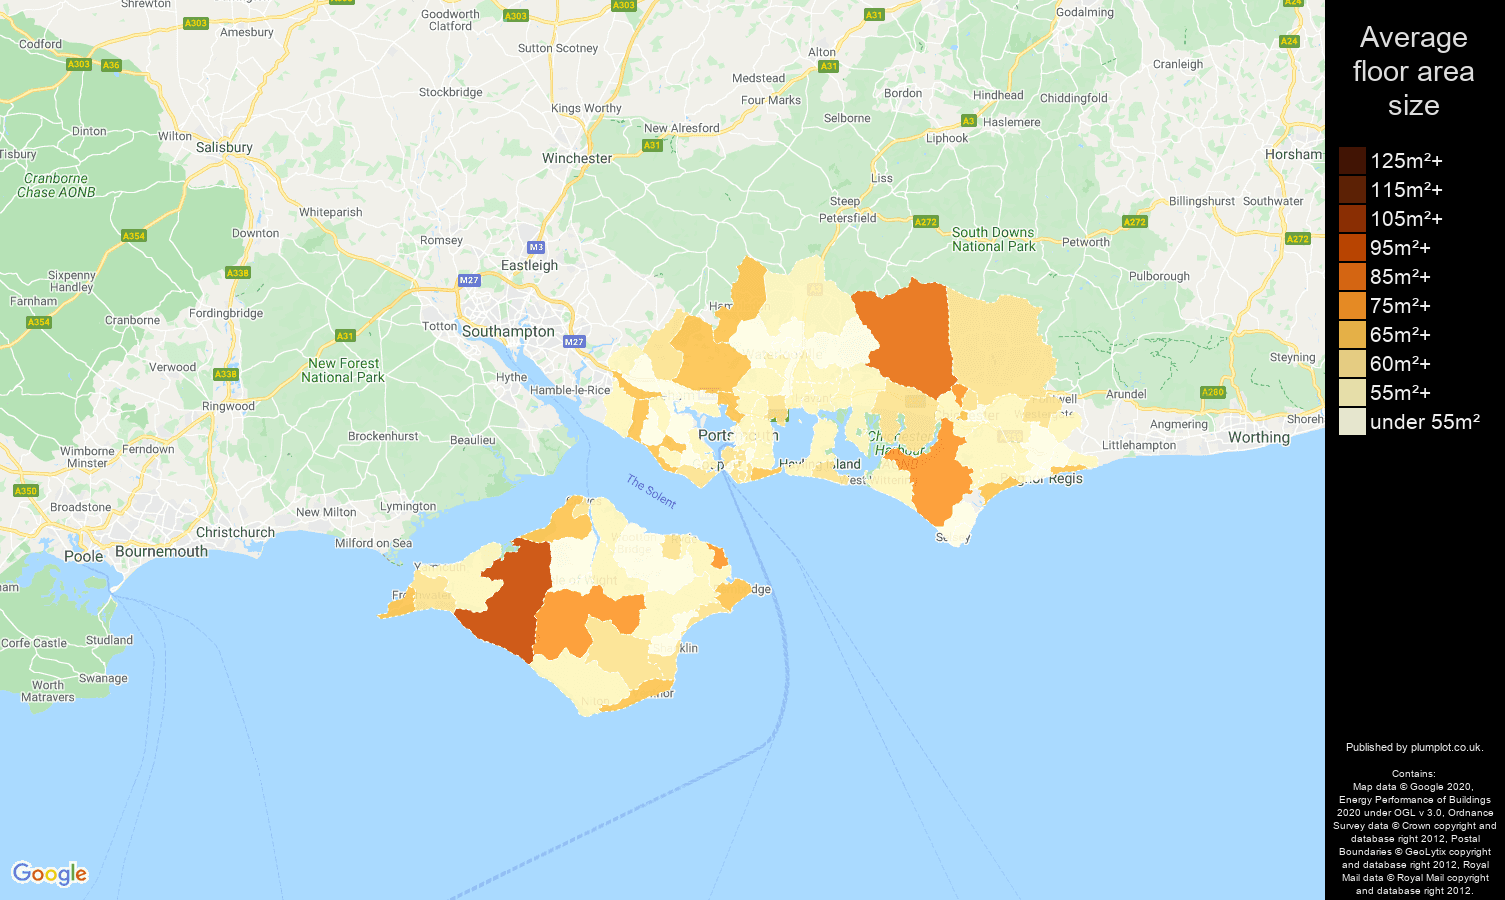 Portsmouth map of average floor area size of flats